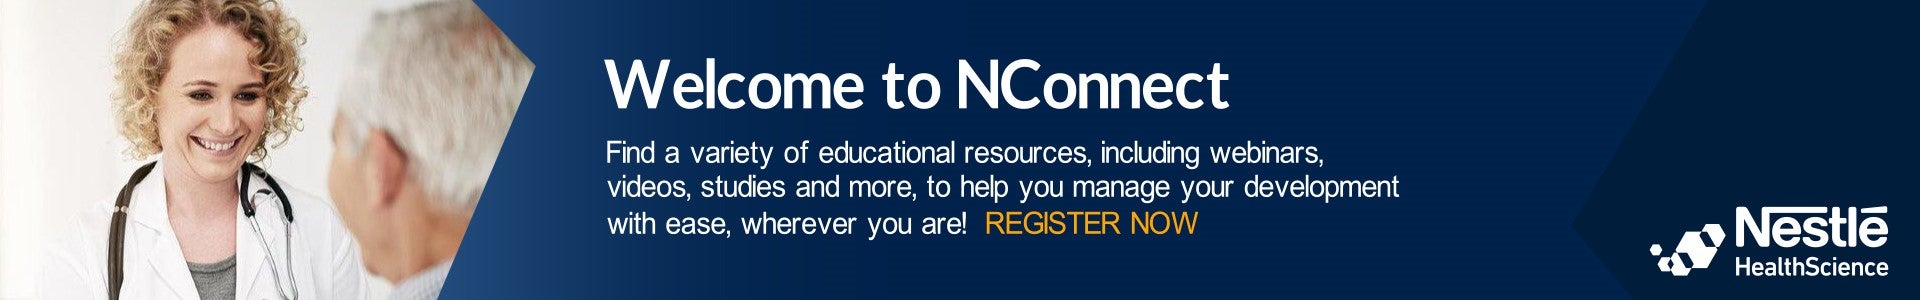 NConnect banner